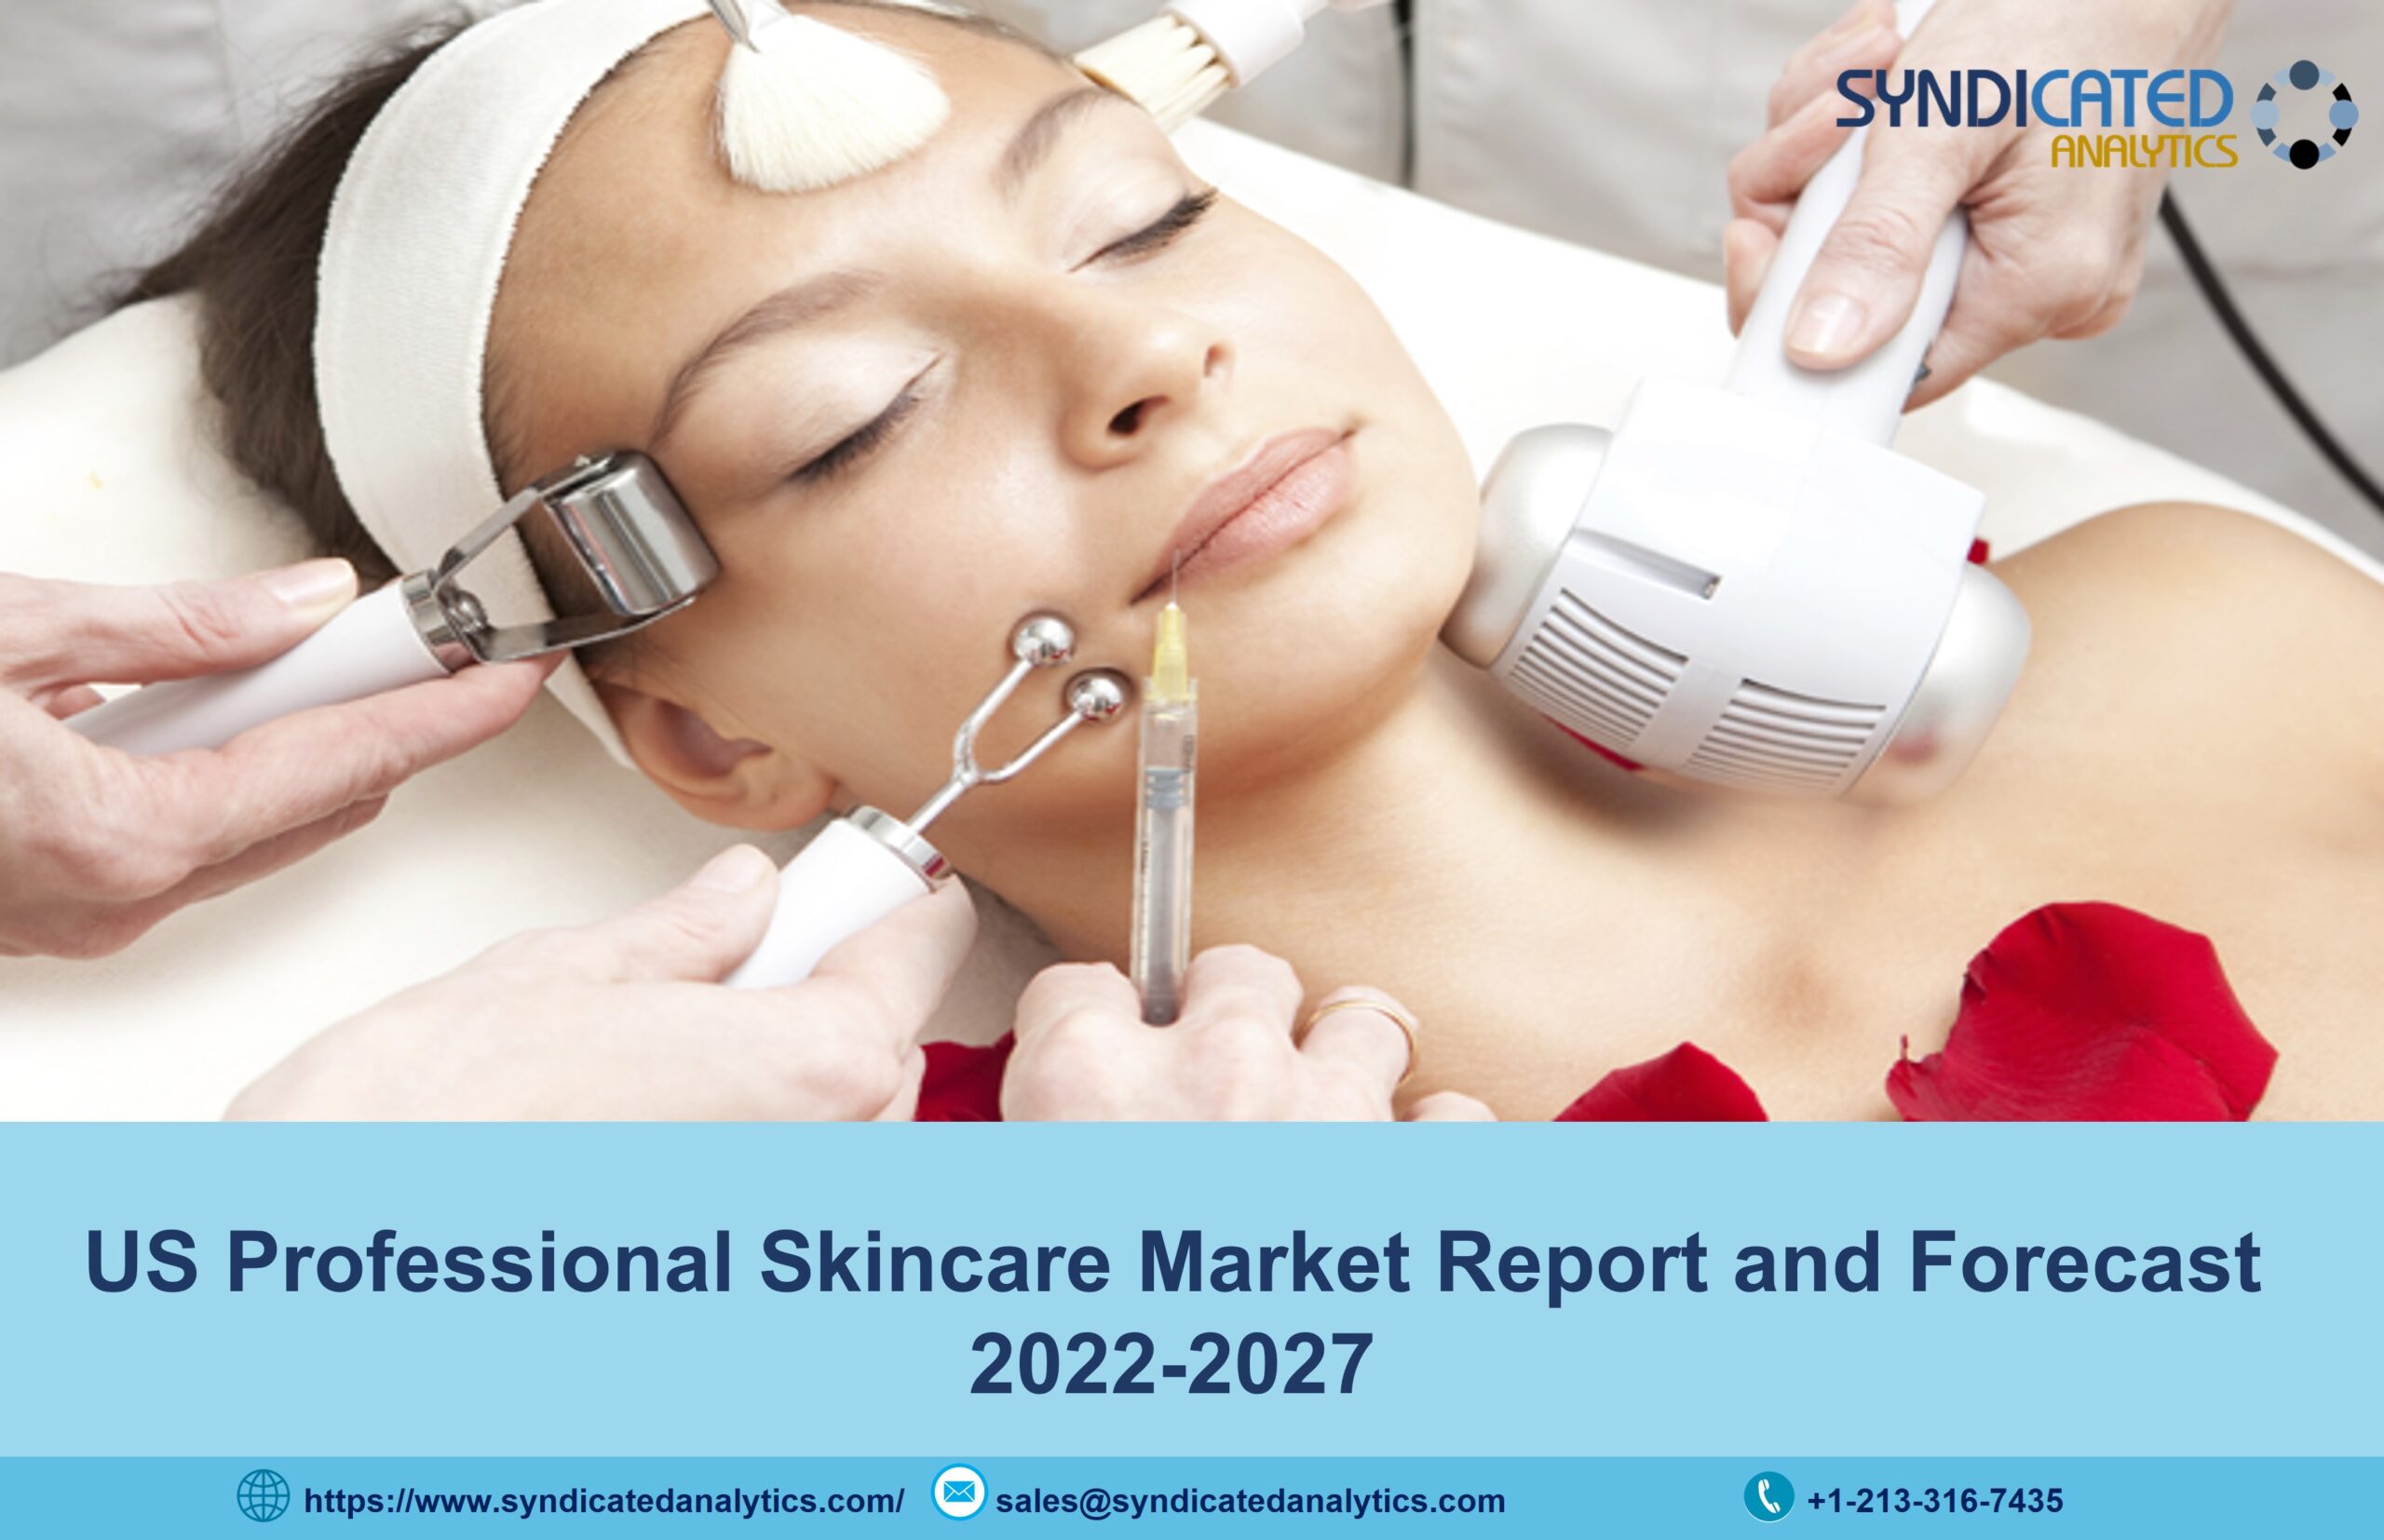 US Professional Skincare Market Size 2022, Price Trends, Growth, Share, Demand, Opportunities And Forecasts To 2027 | Syndicated Analytics